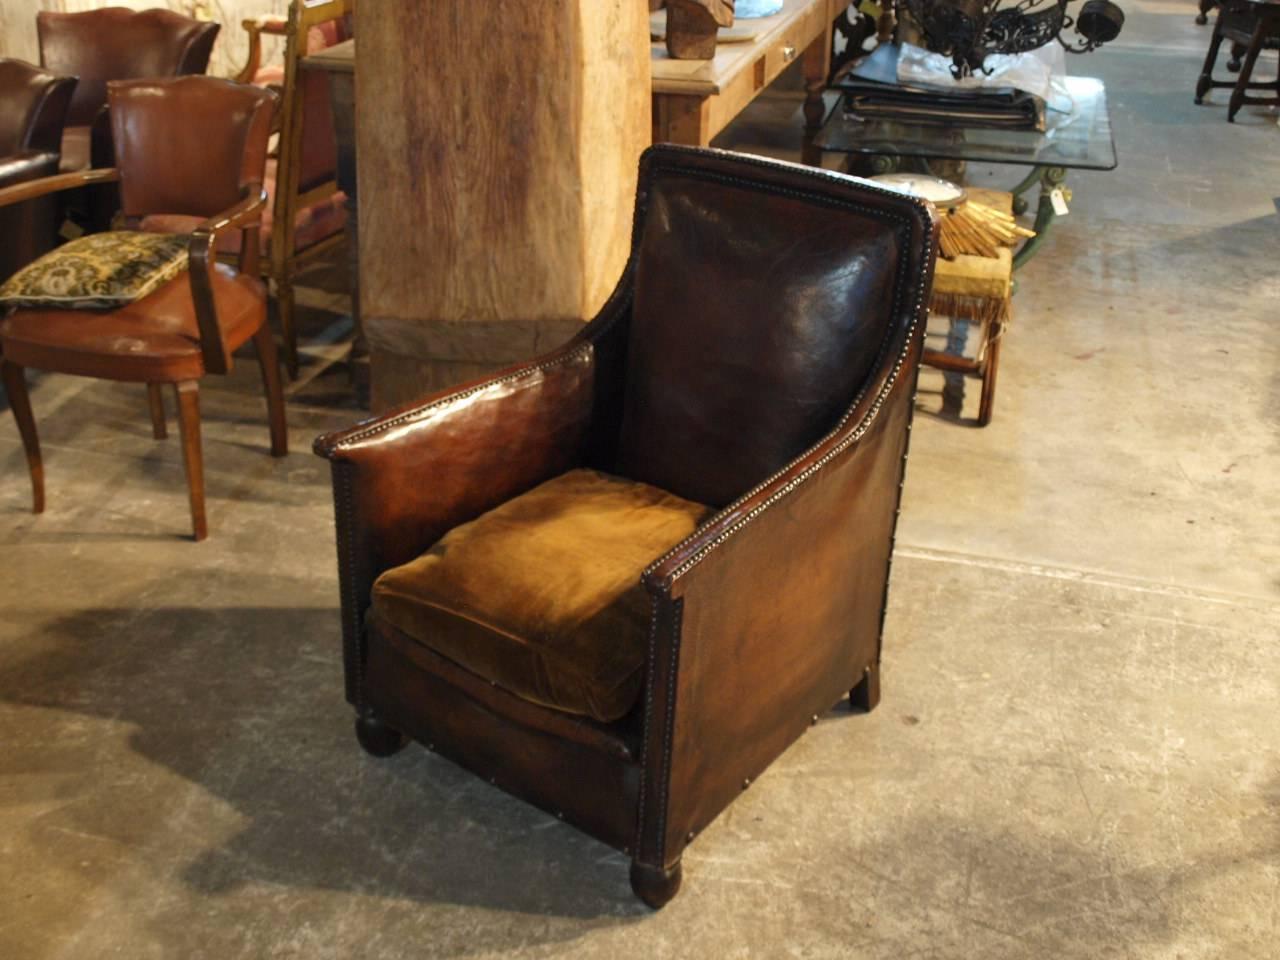 A very handsome French Art Deco club chair in leather with striking nail head detailing. Very comfortable with a rich patina.